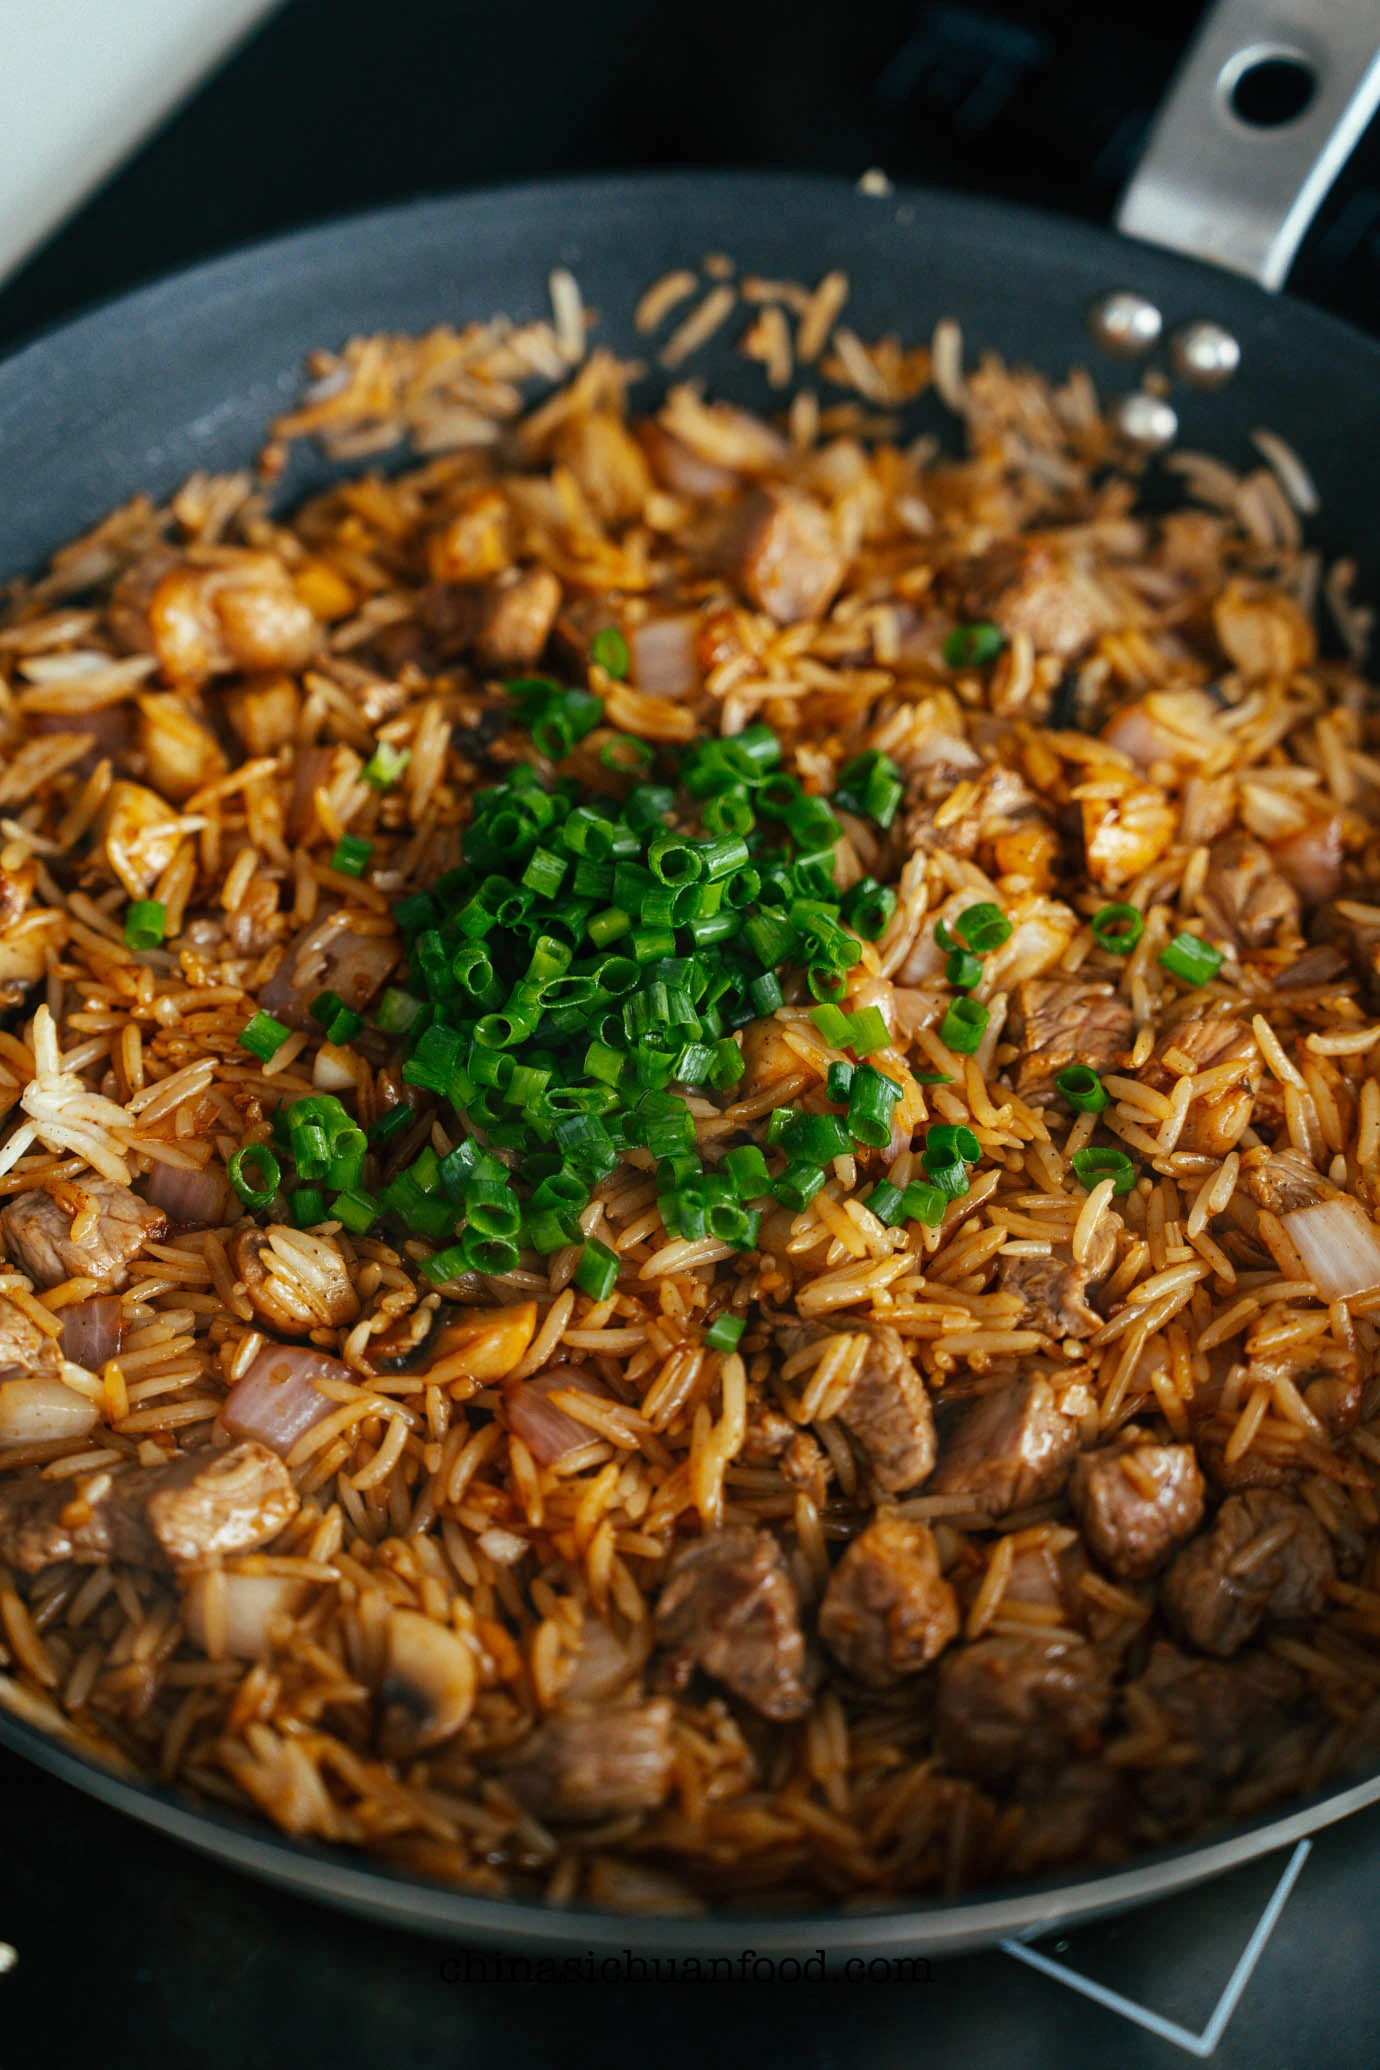 beef and button mushrooms fried rice | chinasichuanfood.com